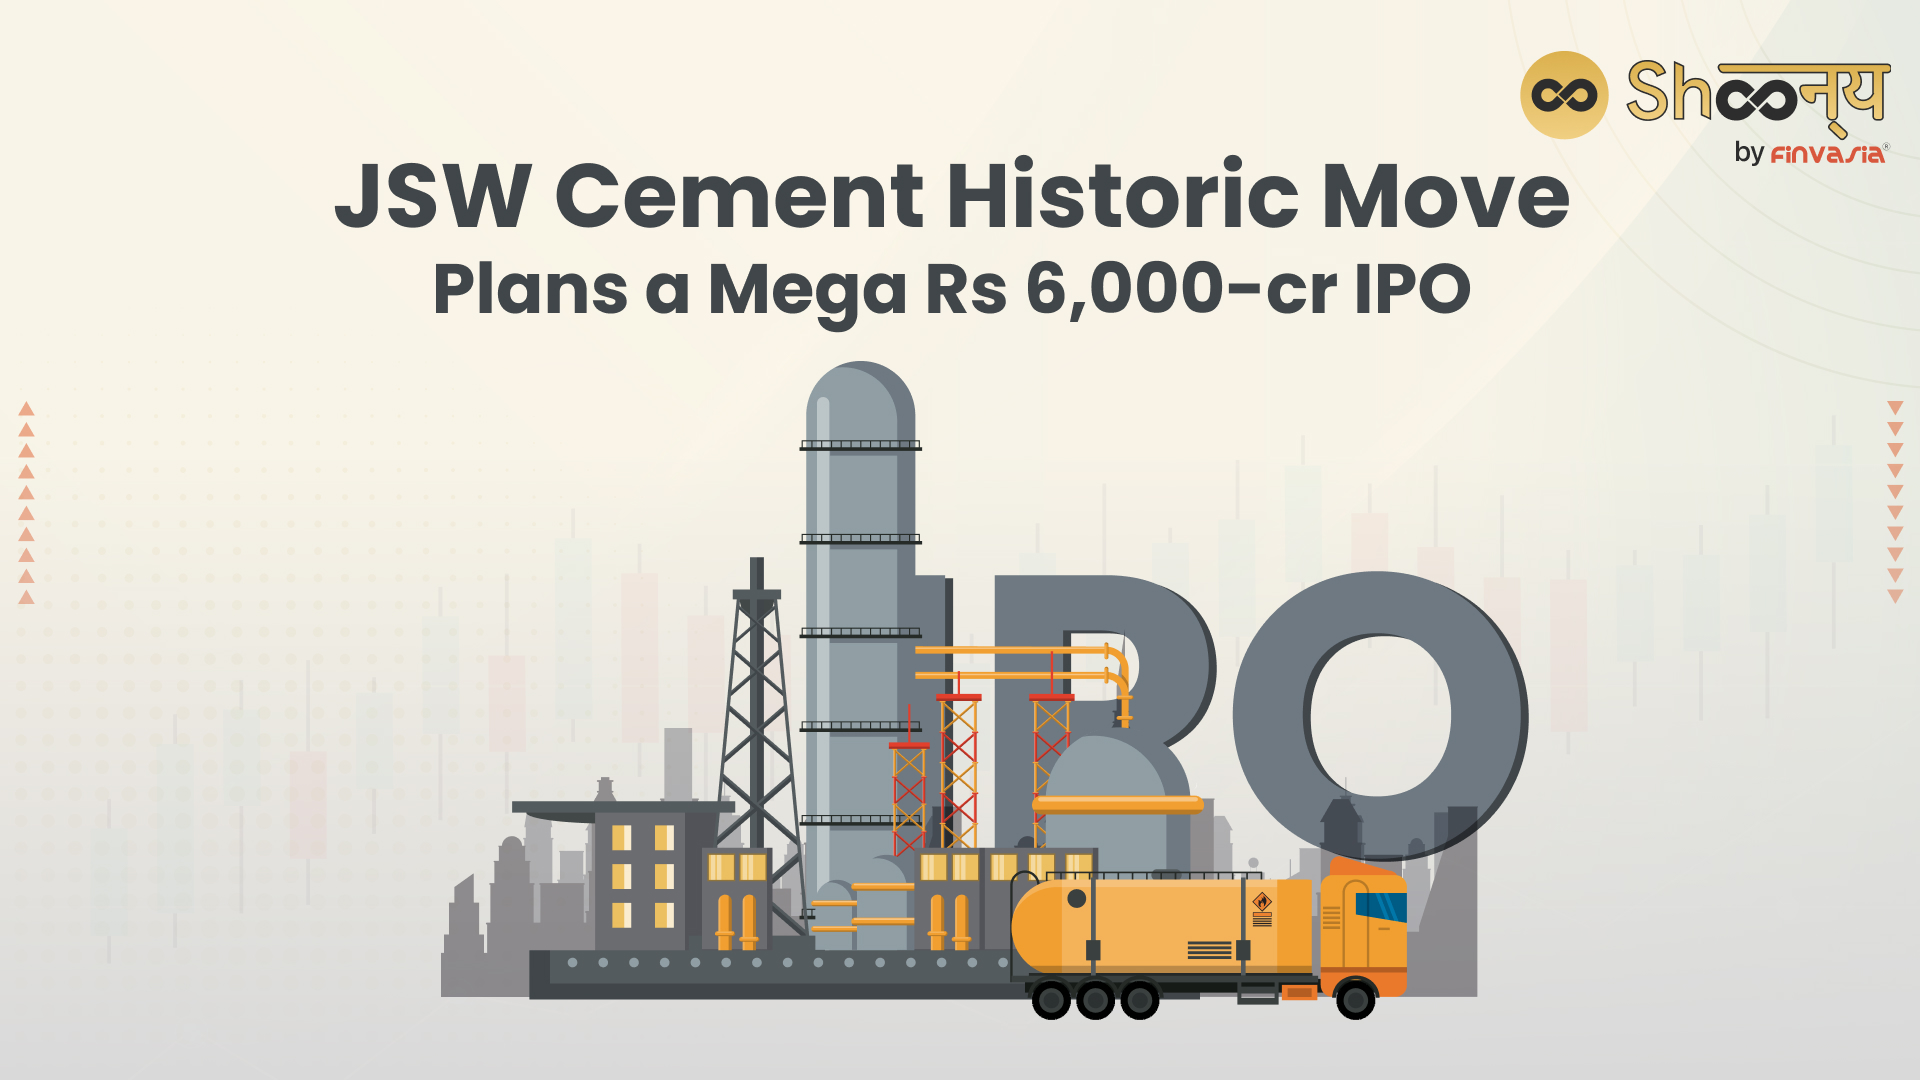 JSW Cement's IPO Plans: Aims to Raise Rs 6,000-cr